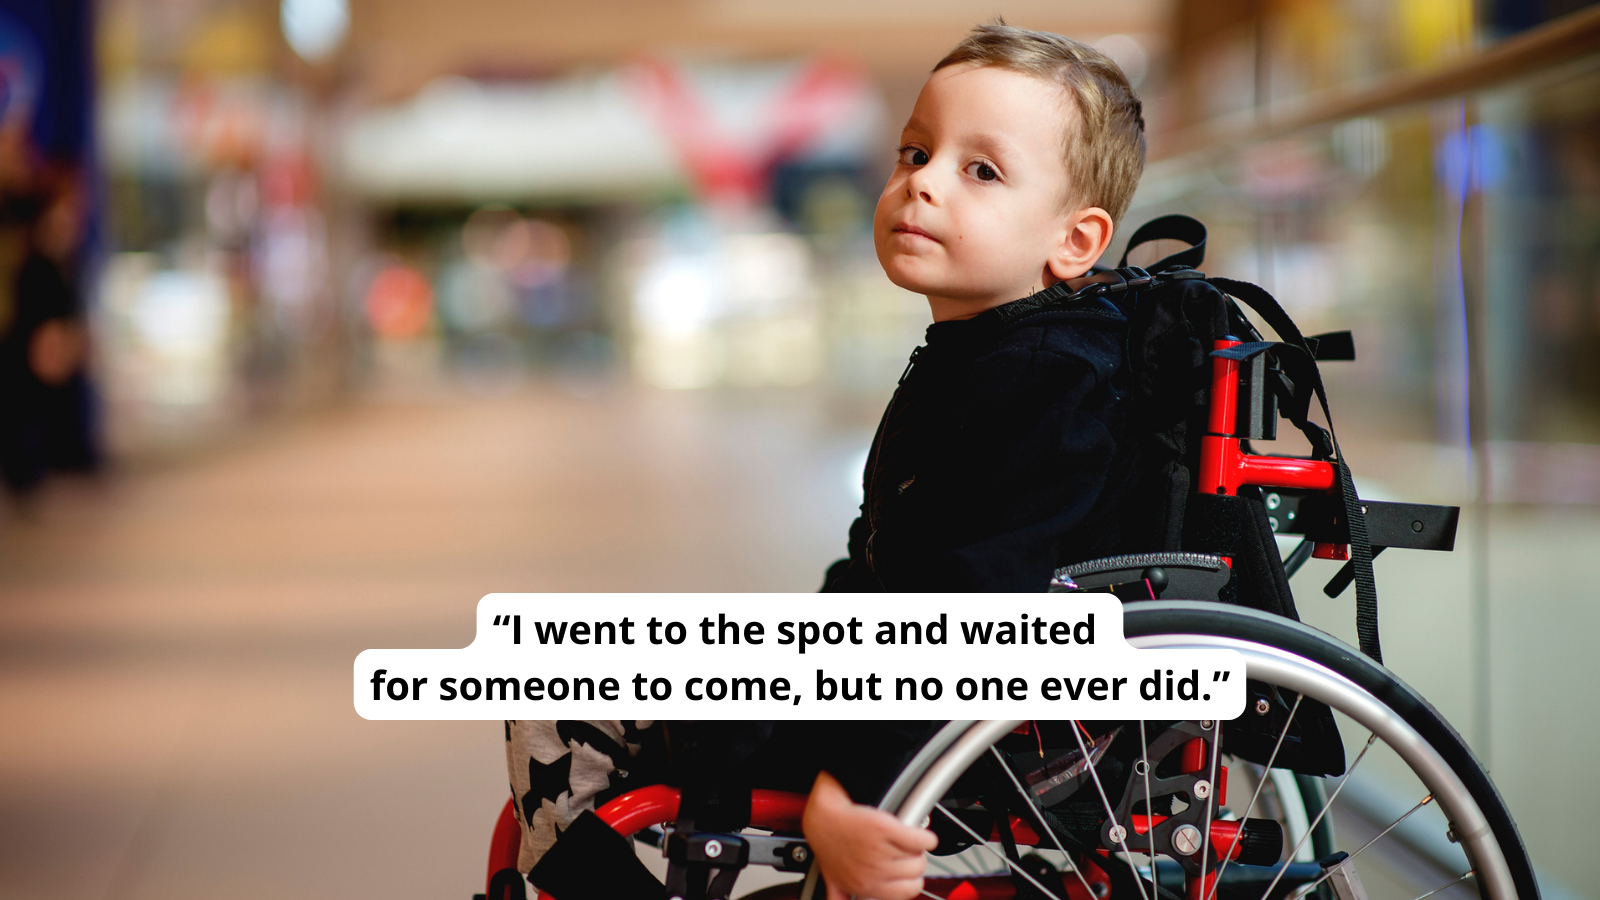 Quote about neglect from students with disabilites